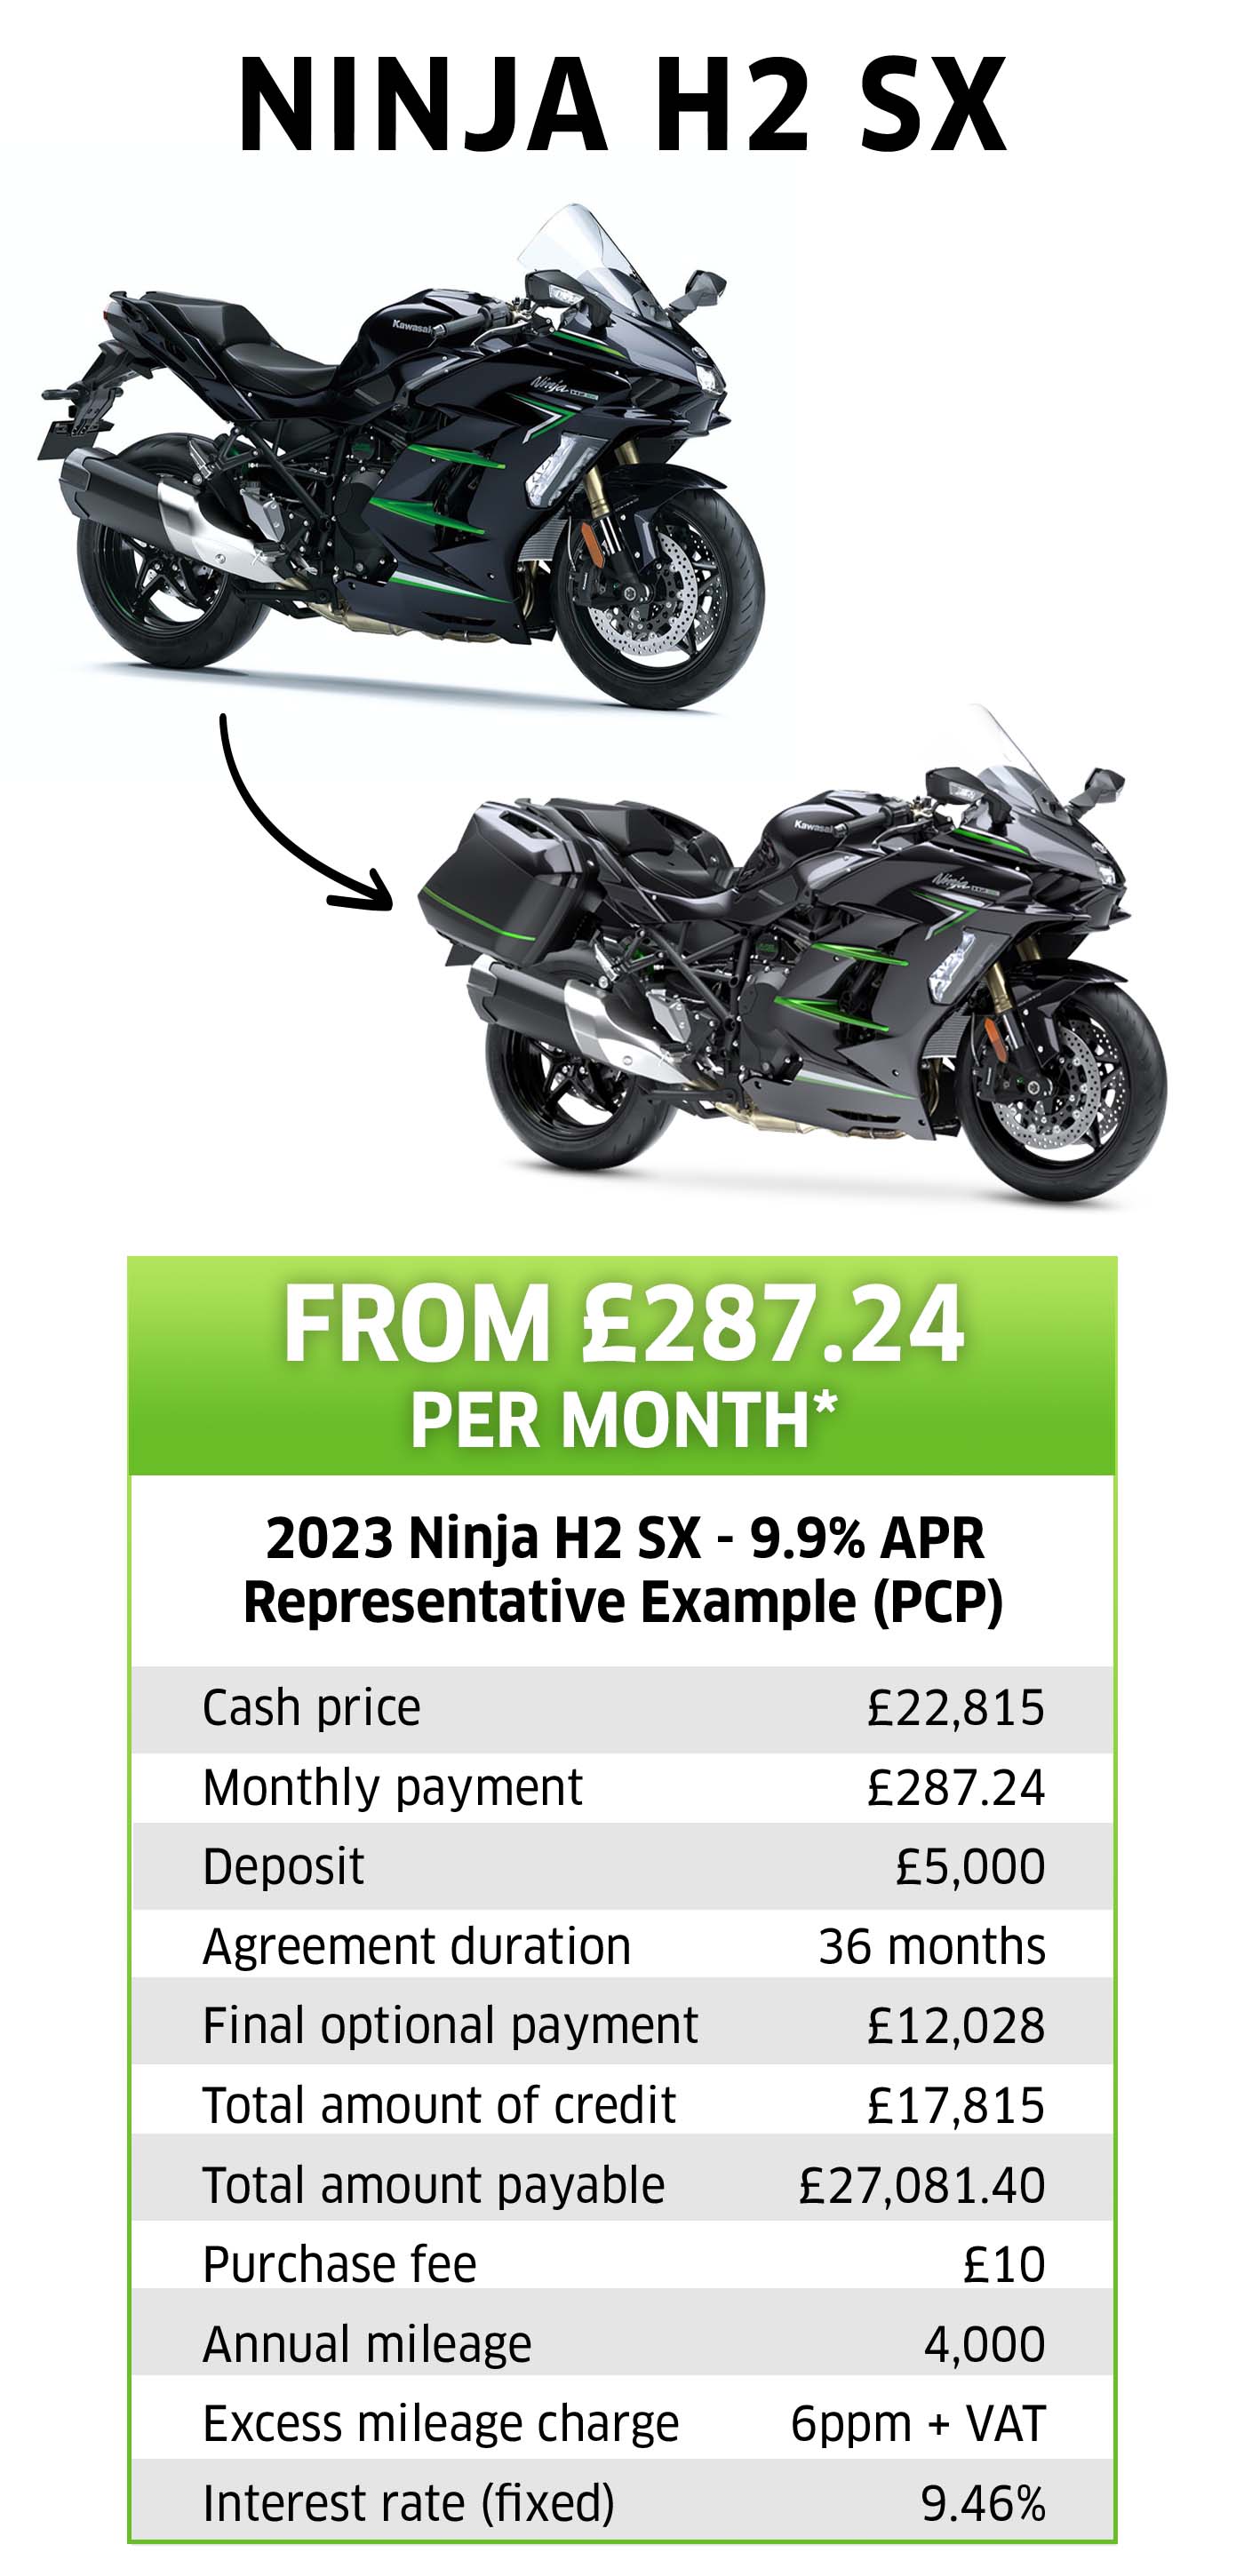 Kawasaki Ninja H2 SX: Enjoy a Free Tourer Upgrade worth £1,150 when you purchase a new 2022 or 2023 model with K-Options 9.9% APR representative finance.